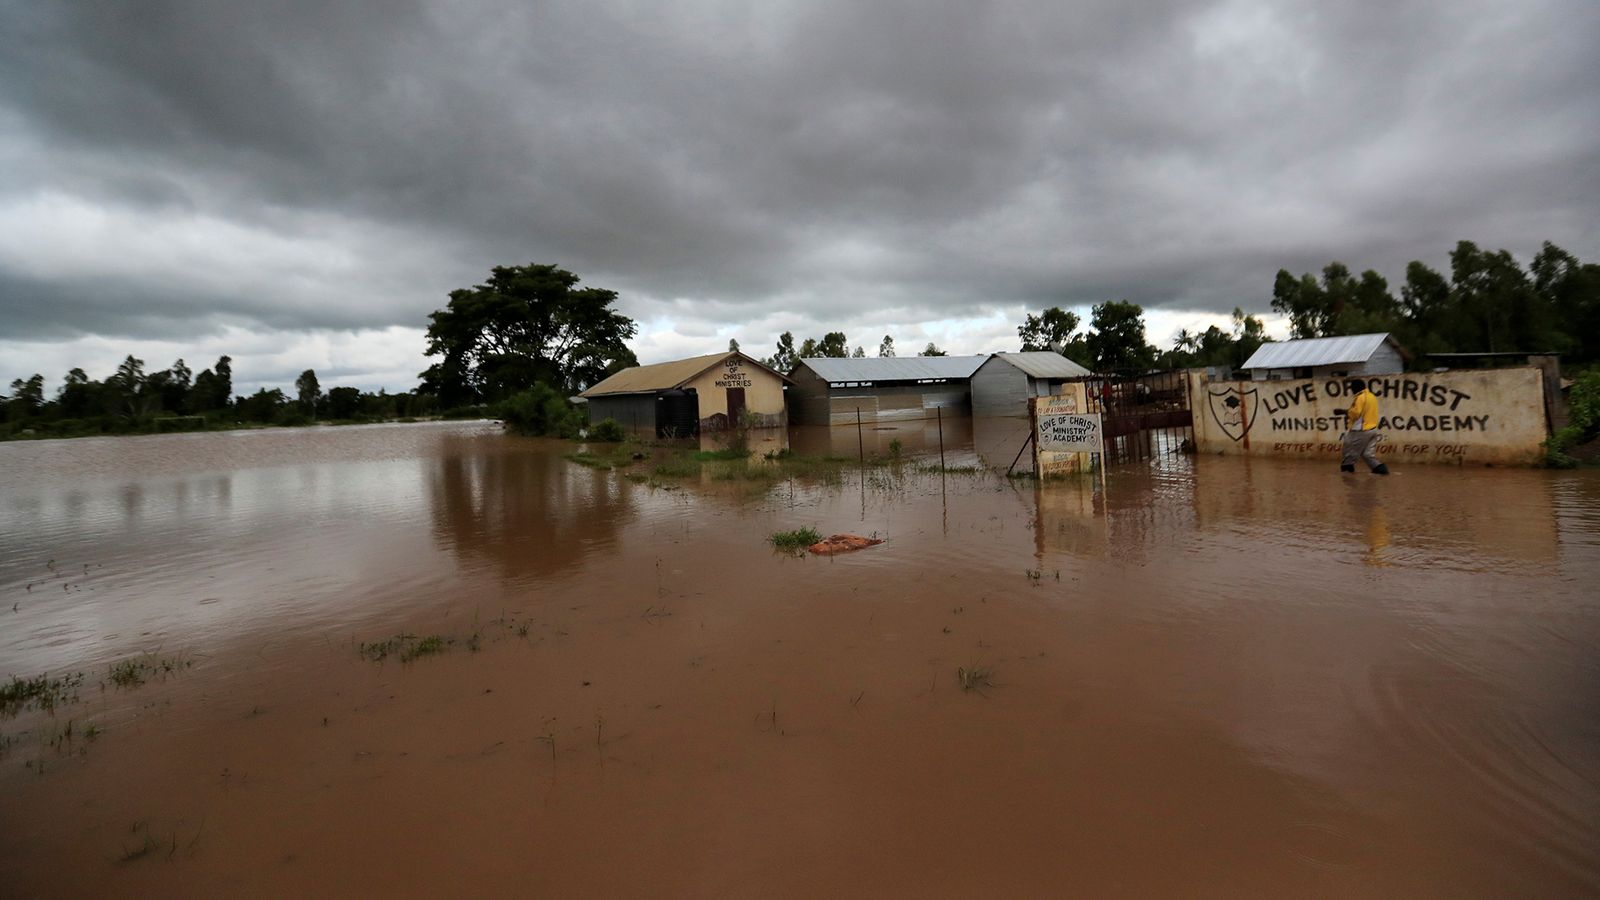 Kenya Severe flooding kills nearly 200 people and displaces 100,000